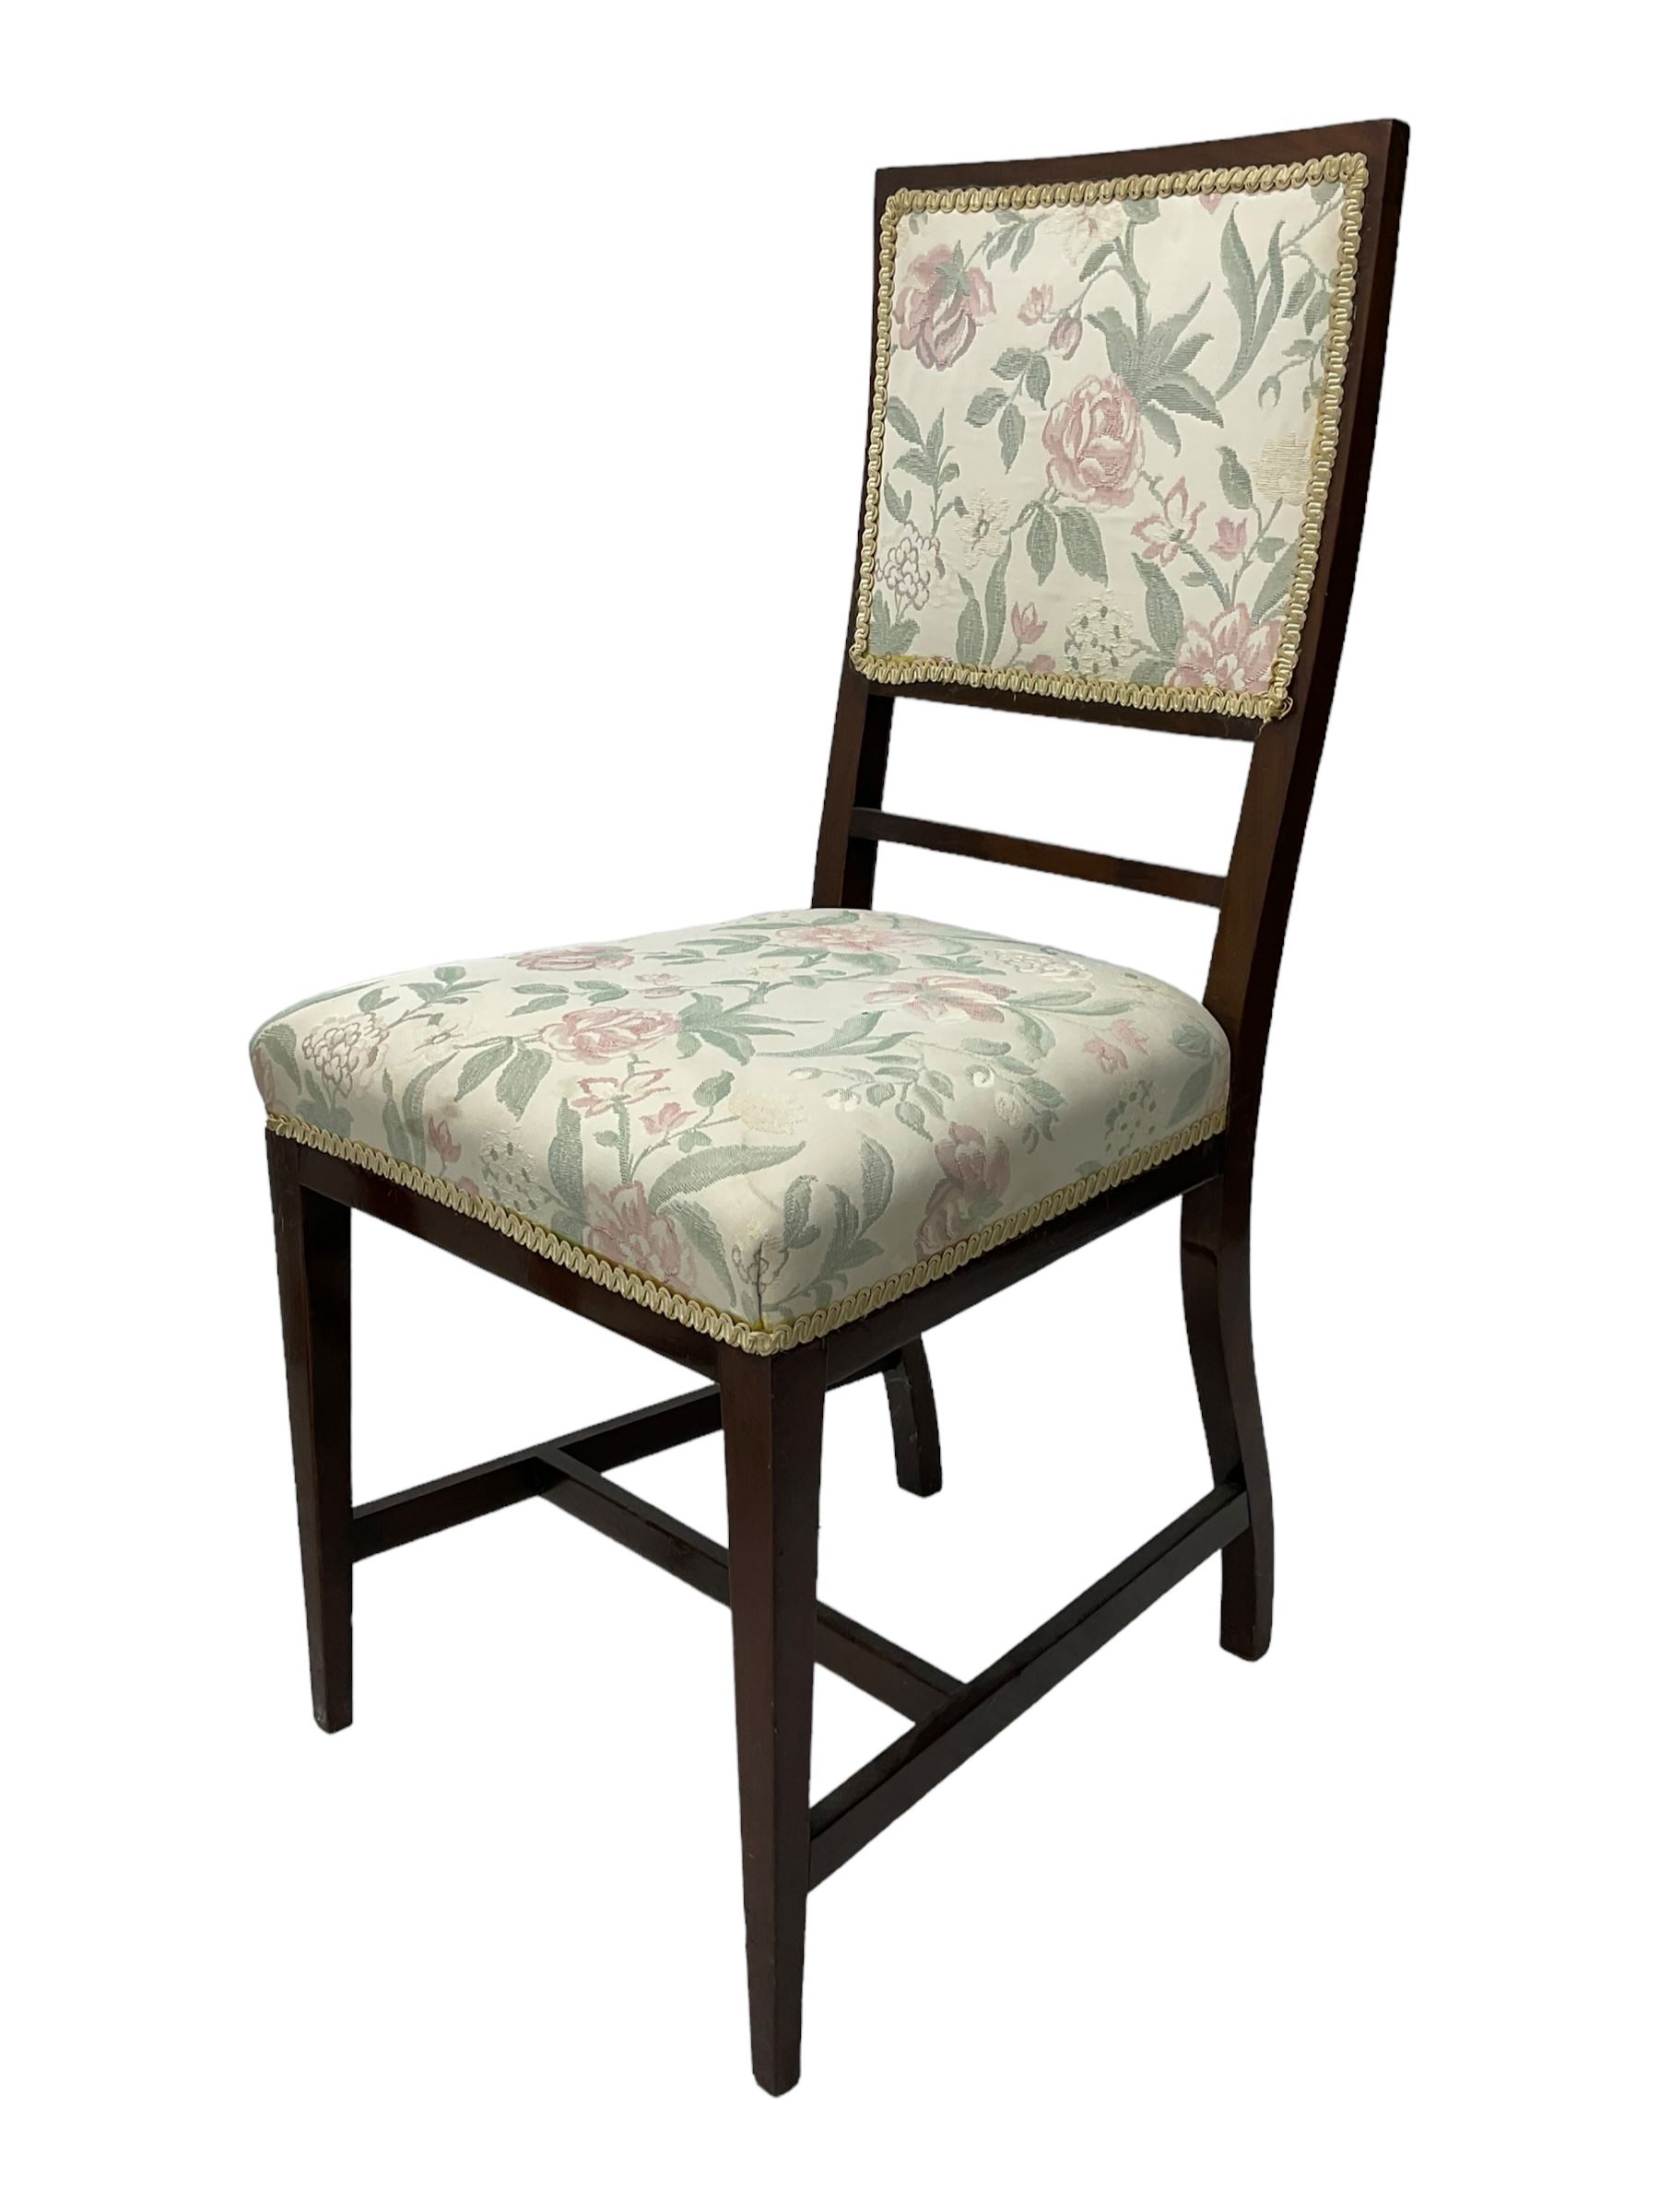 Pair of mahogany framed bedroom chairs upholstered in floral pattern fabric (W45cm); rectangular foo - Image 3 of 5